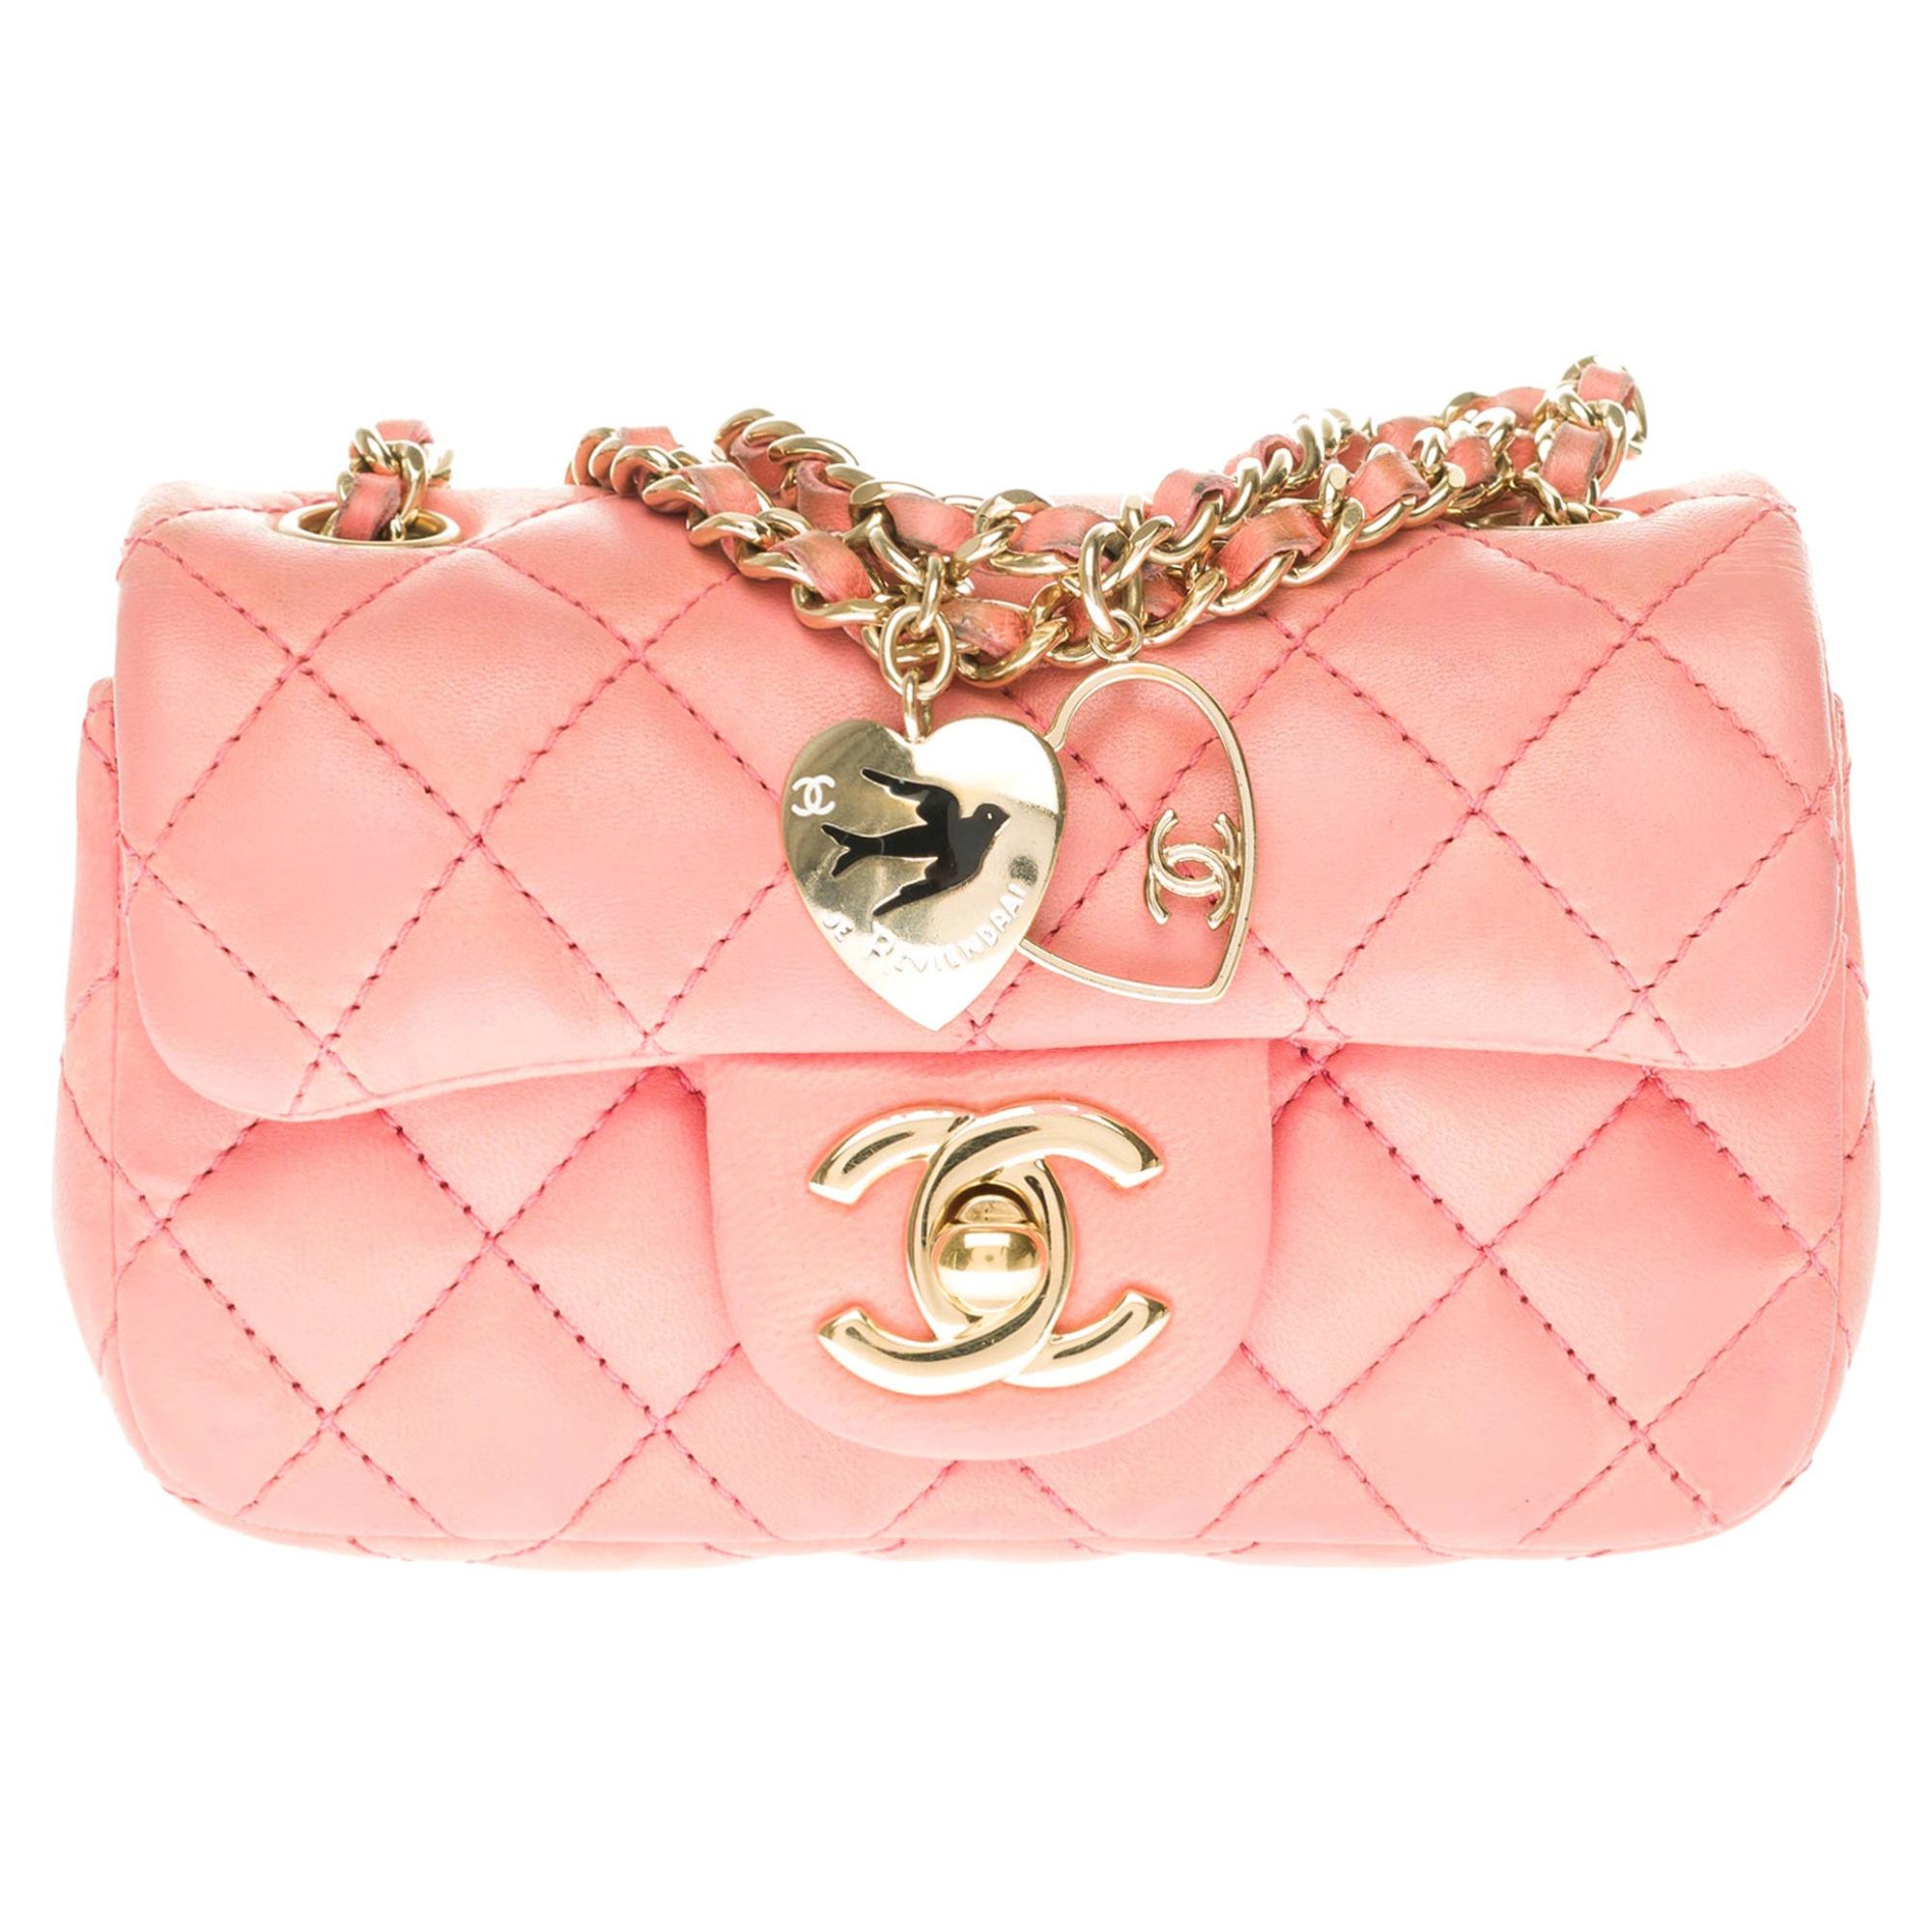 Chanel Mini Charms Shoulder bag in Pink quilted leather and gold hardware